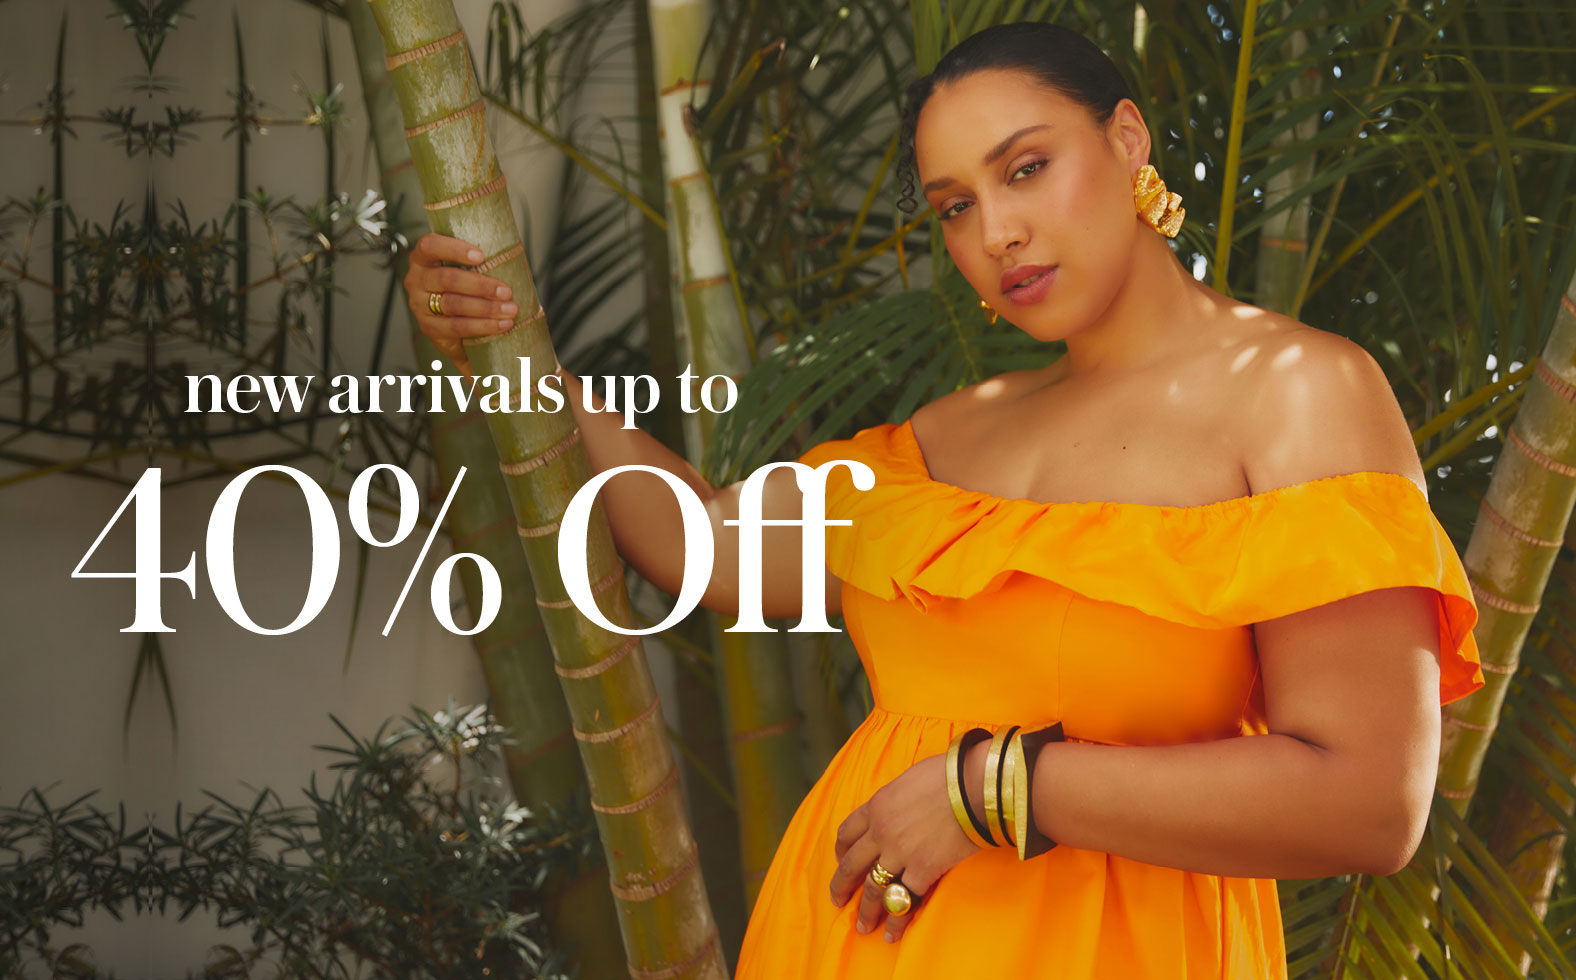 New Arrivals up to 40% Off